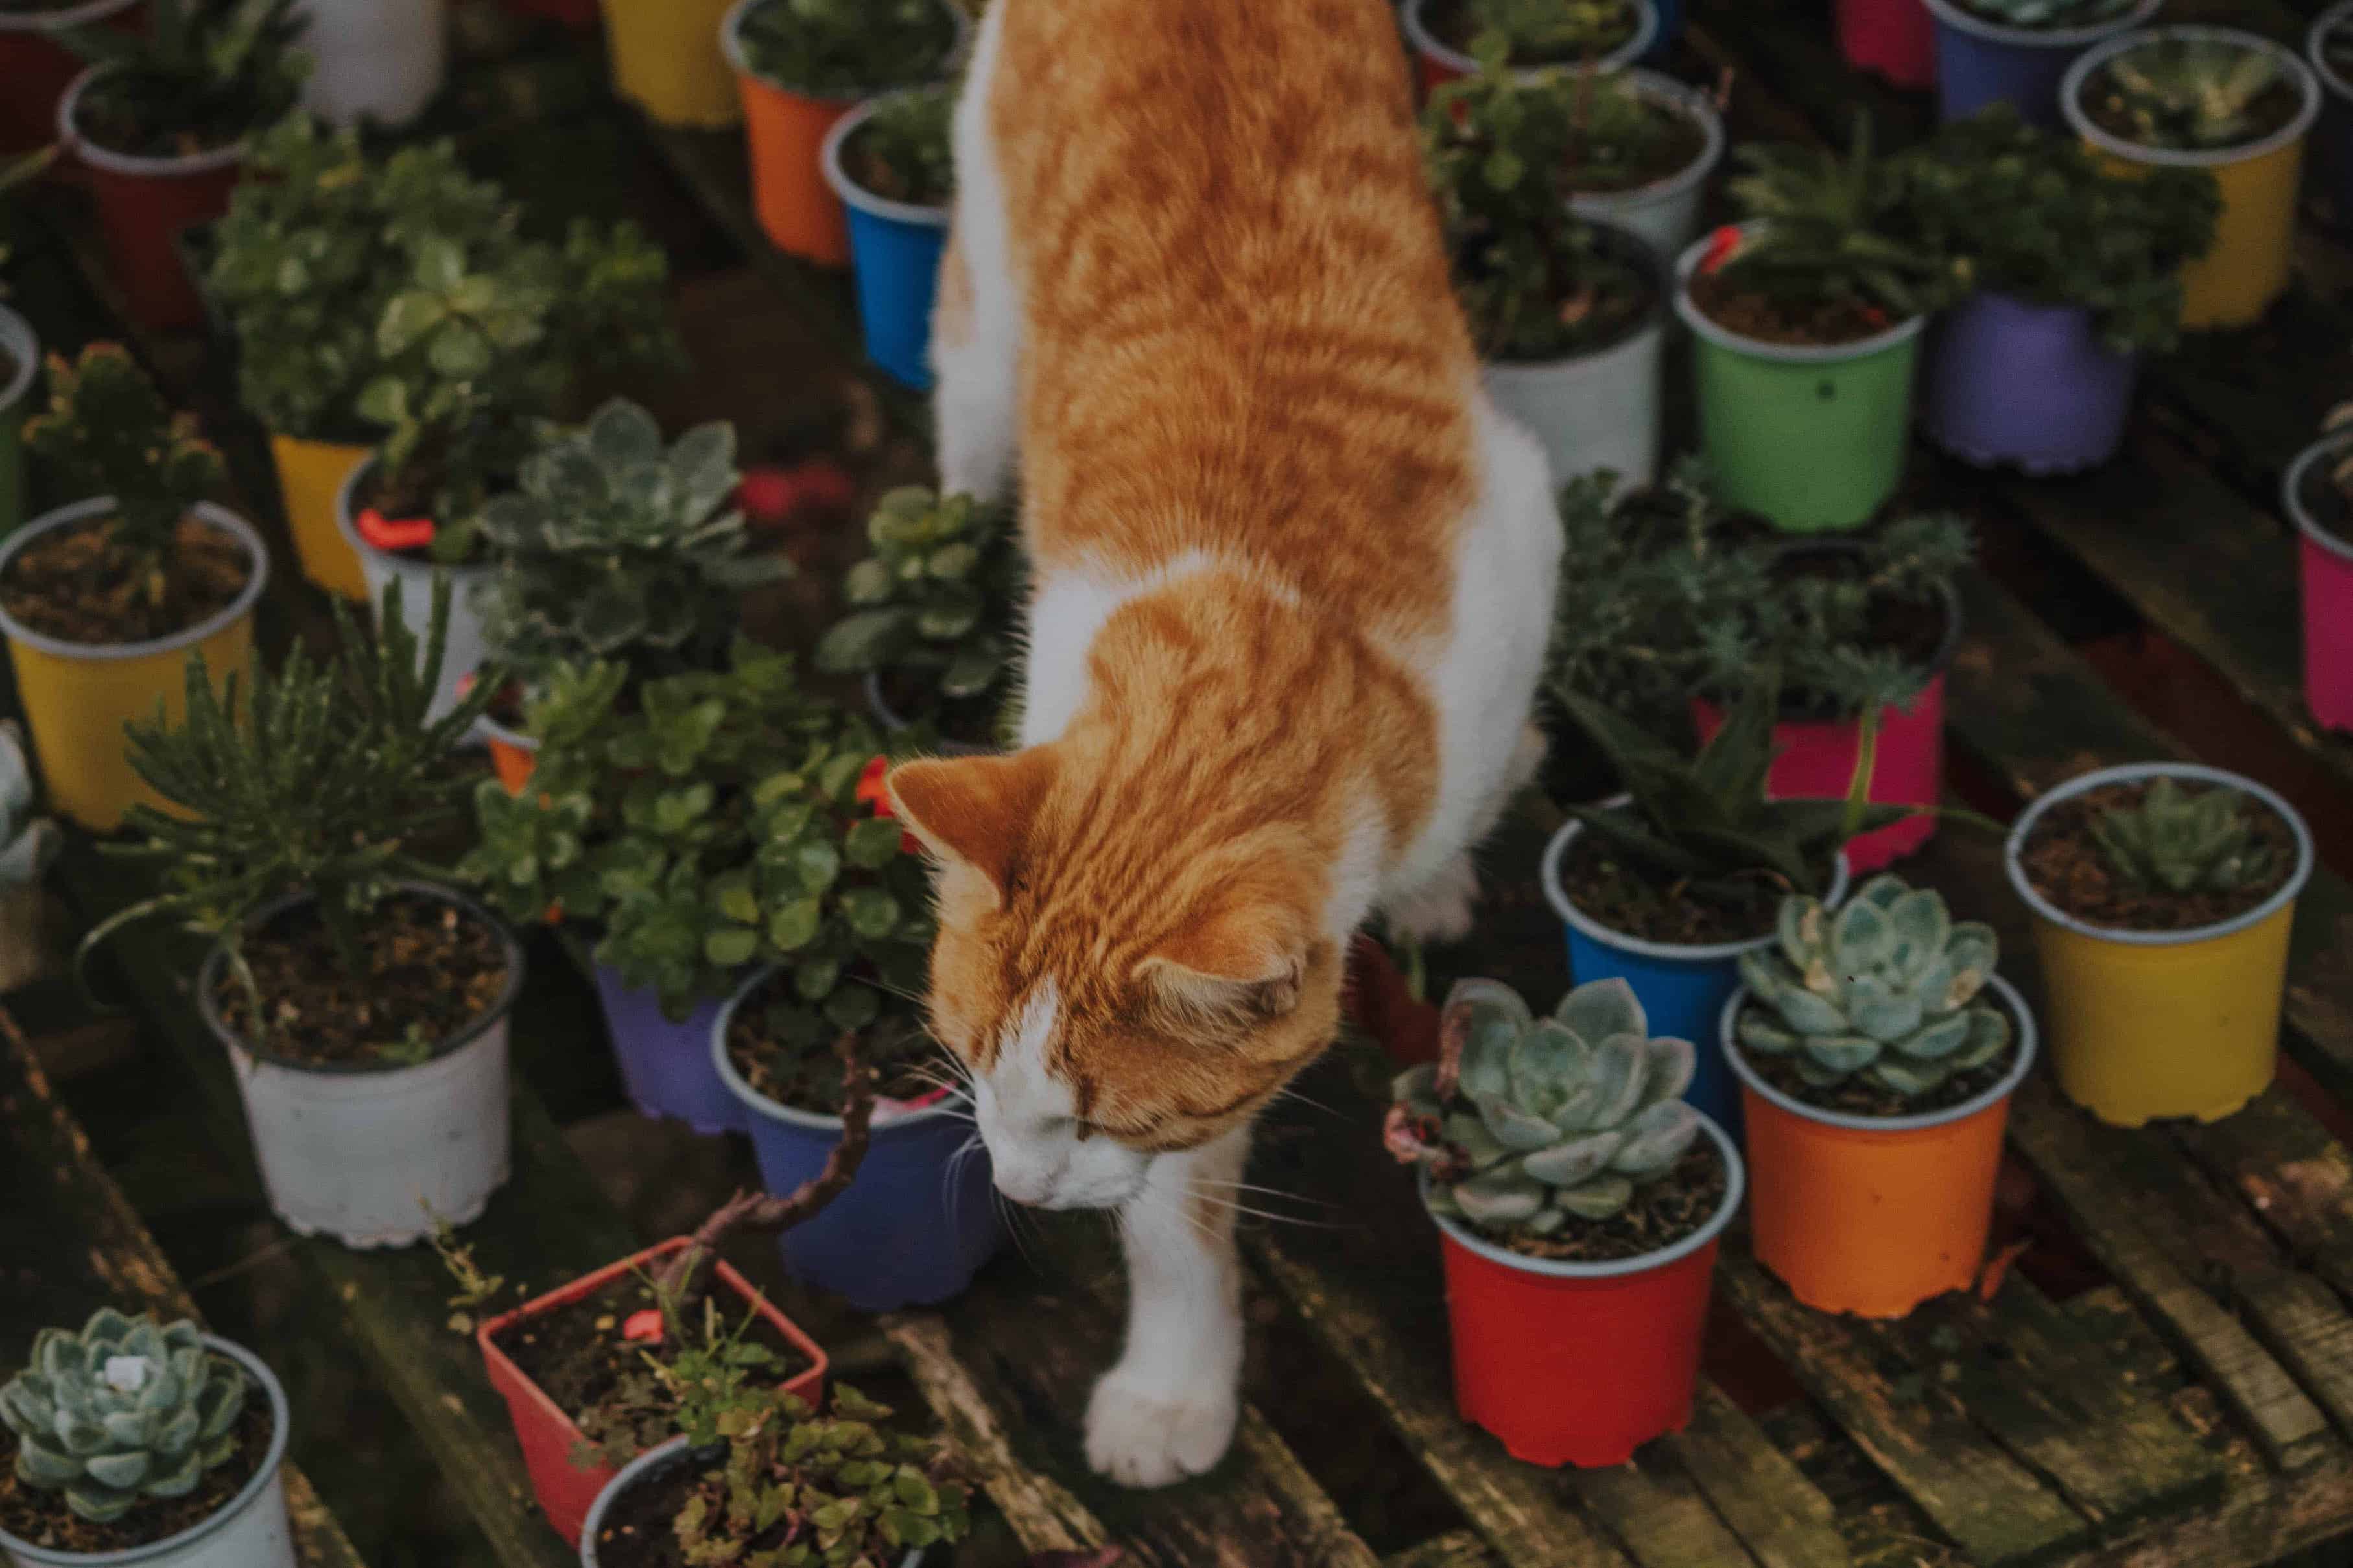 Houseplants That Are Safe for My Cat